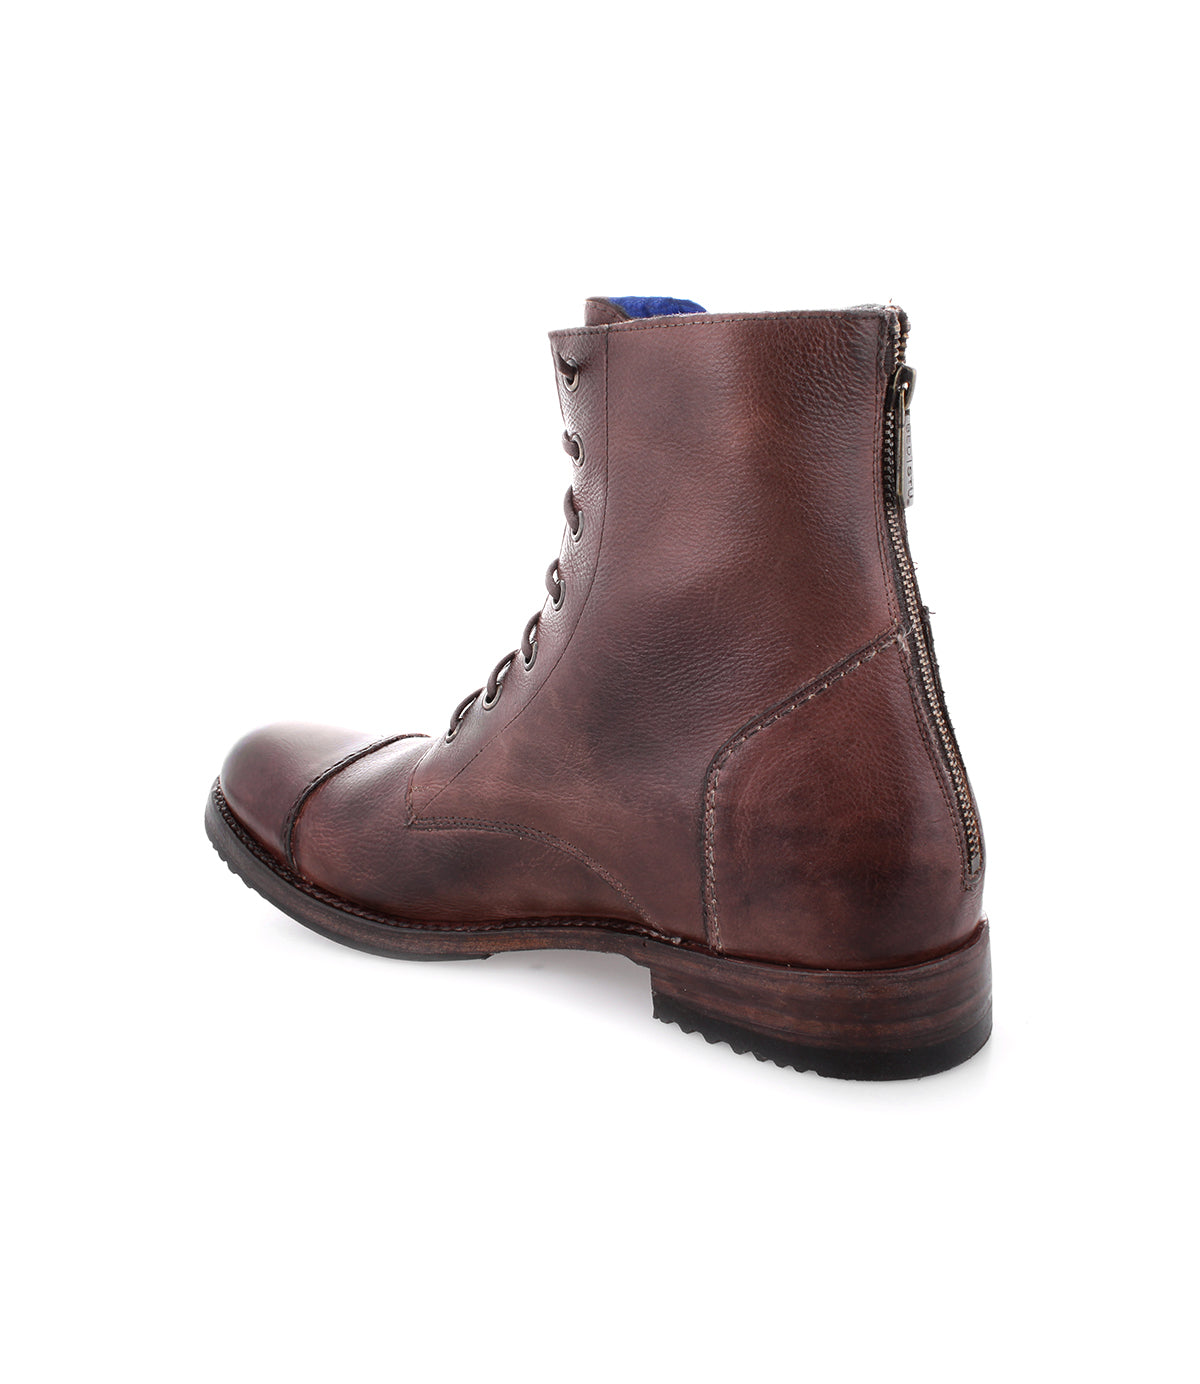 A men's Protege boot by Bed Stu on a white background.